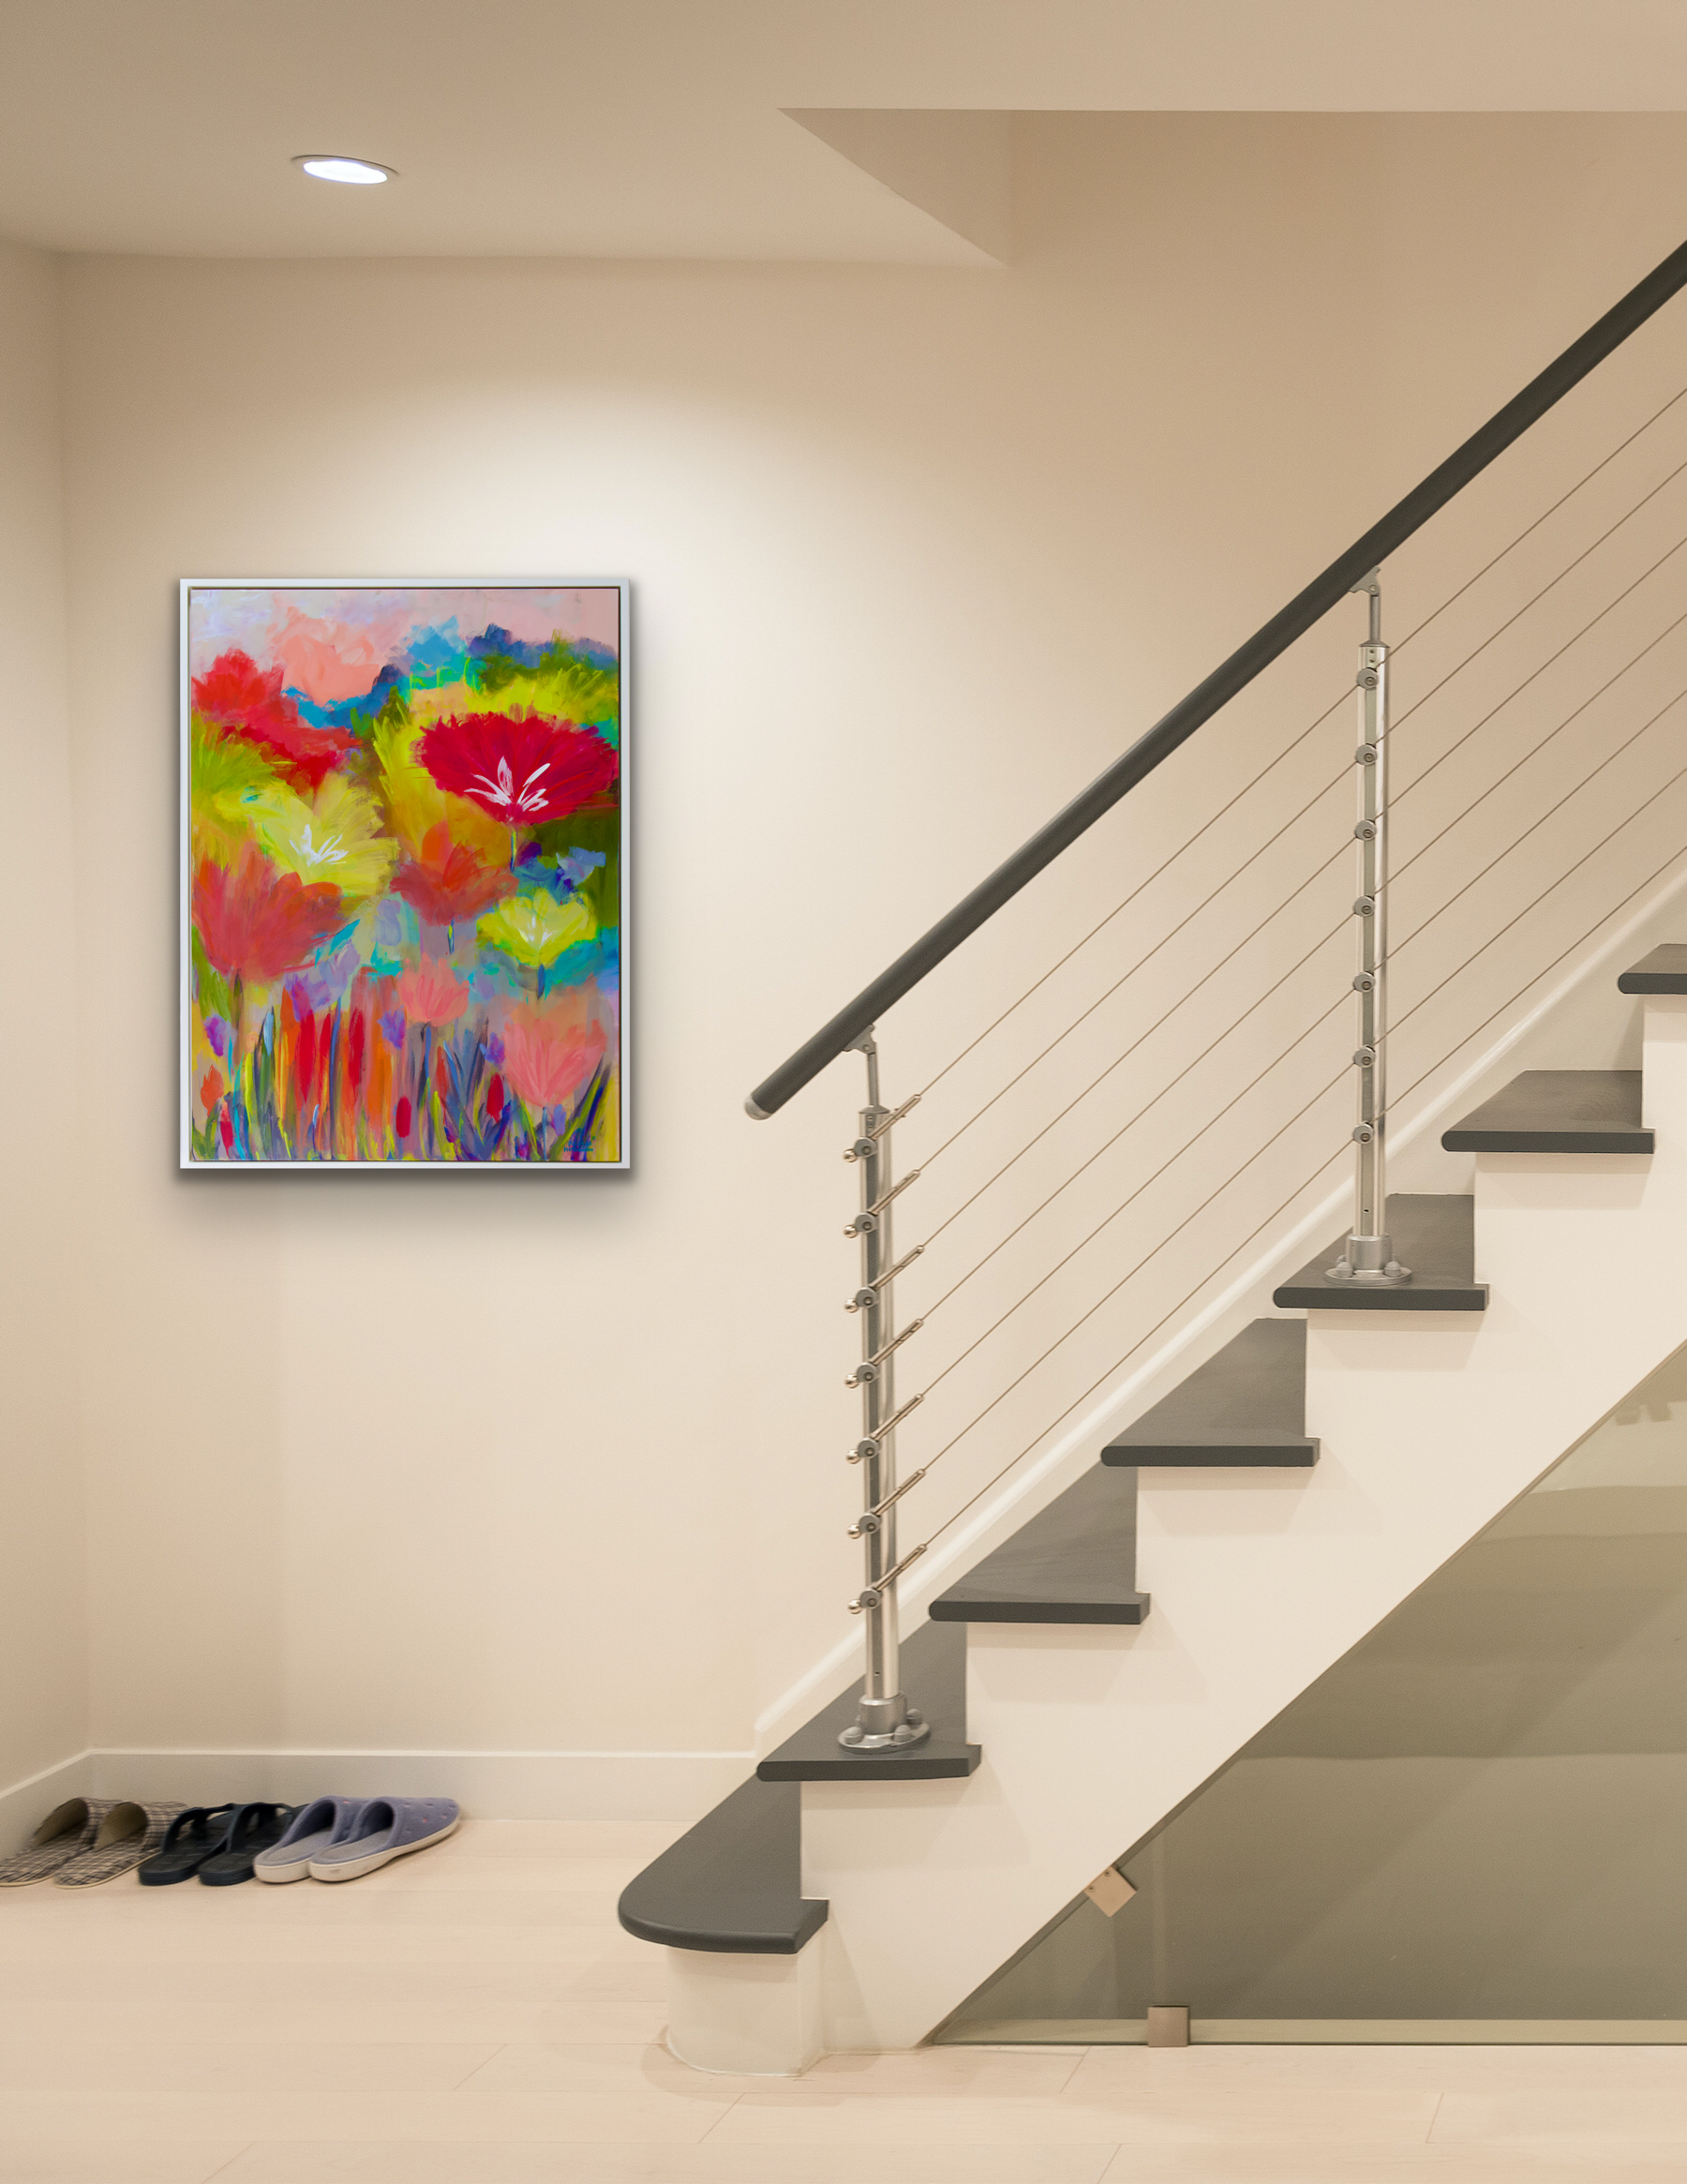 Abstract floral shown in a hallway with stairs going up.